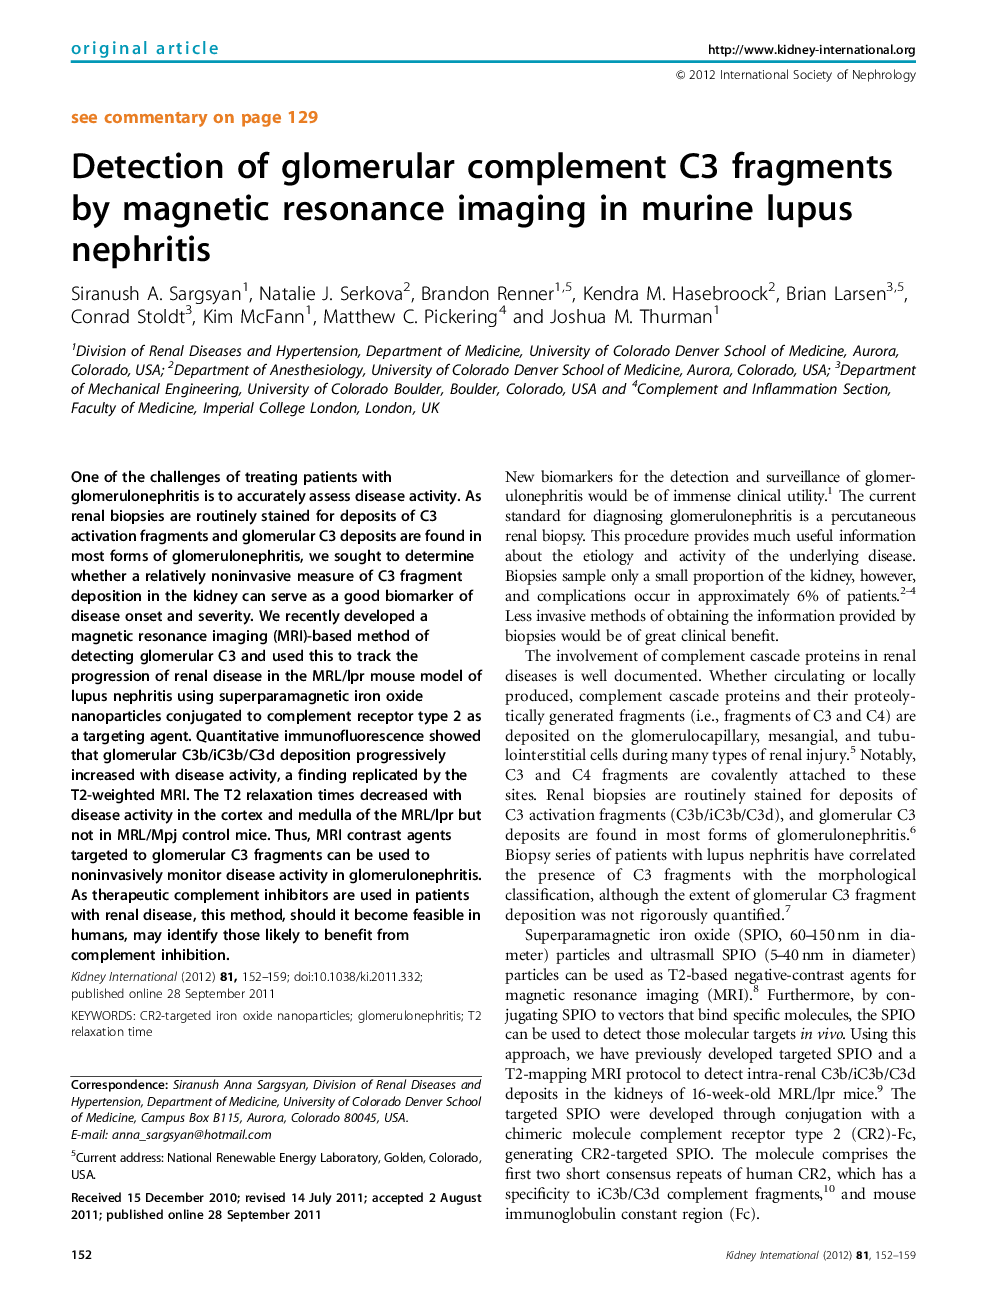 Detection of glomerular complement C3 fragments by magnetic resonance imaging in murine lupus nephritis 